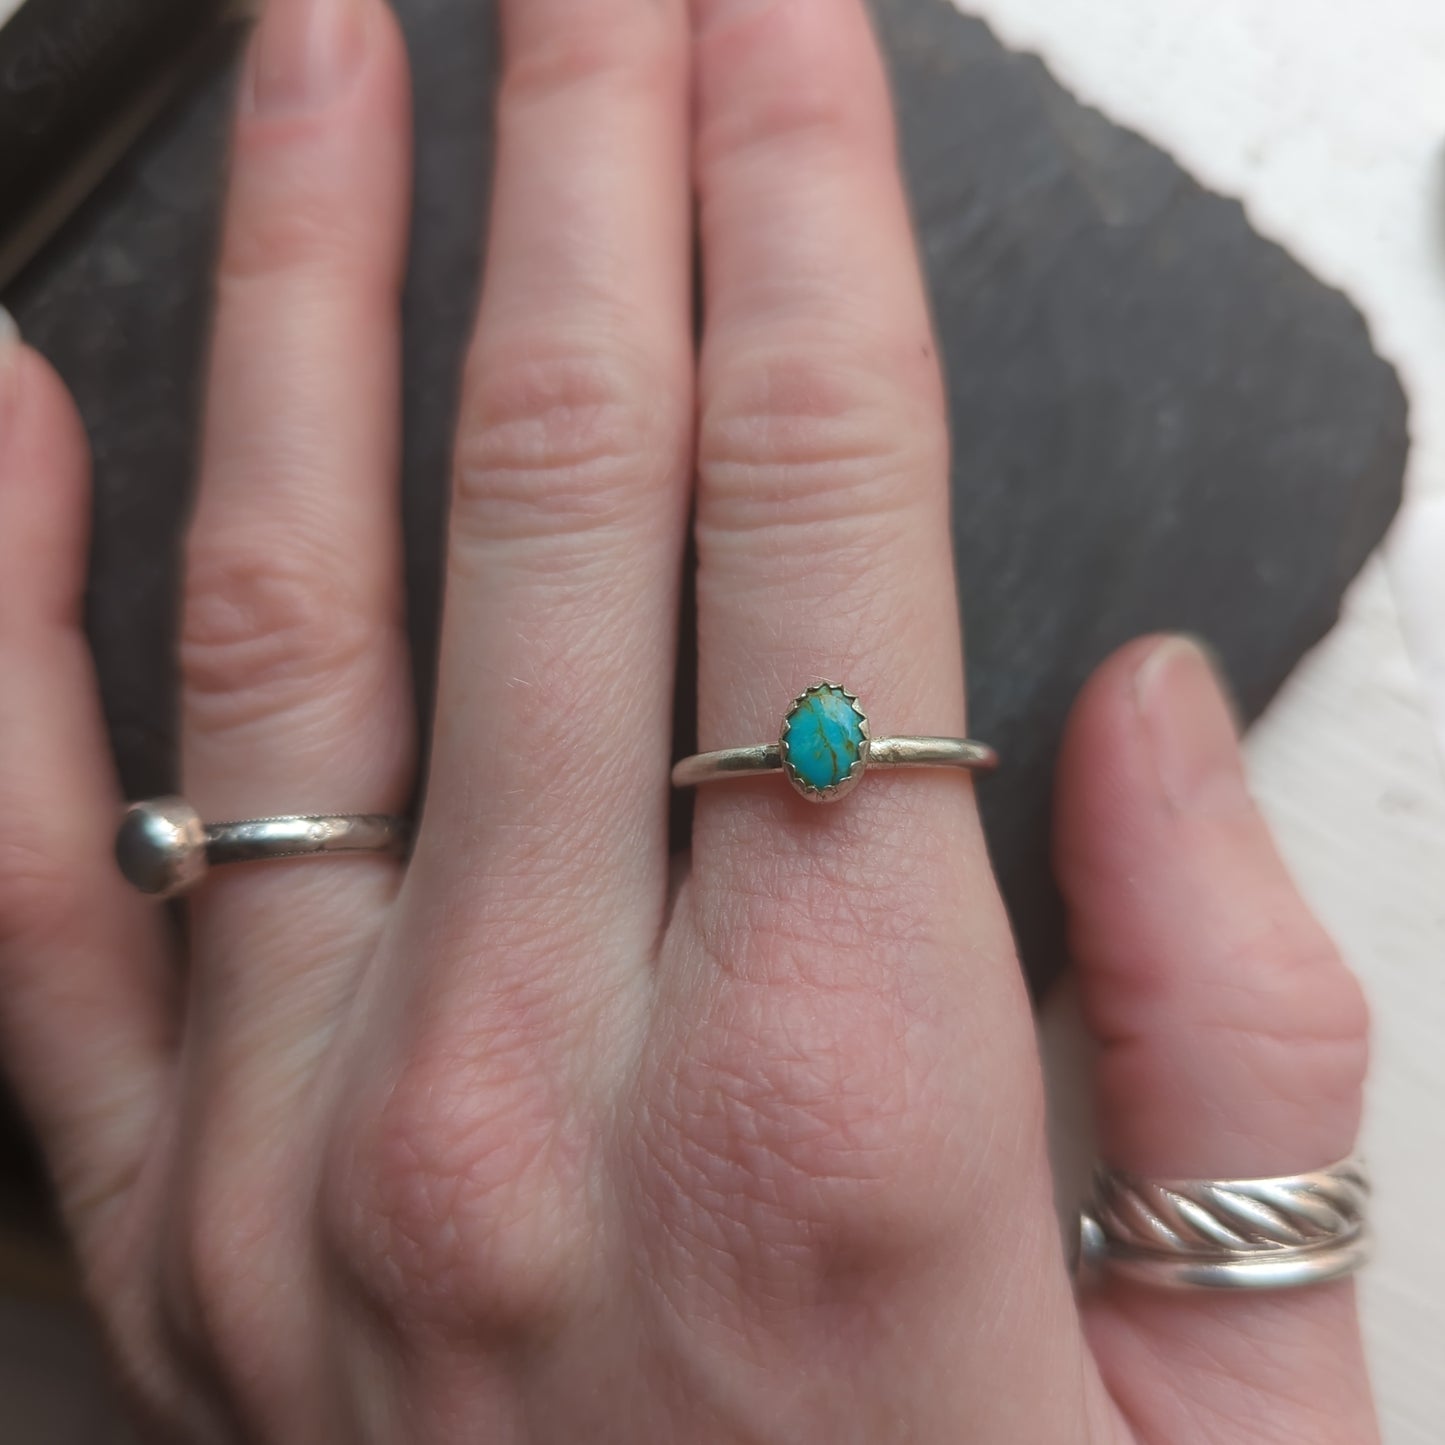 Oval Royston Turquoise Sterling Silver Ring - Size 7.5